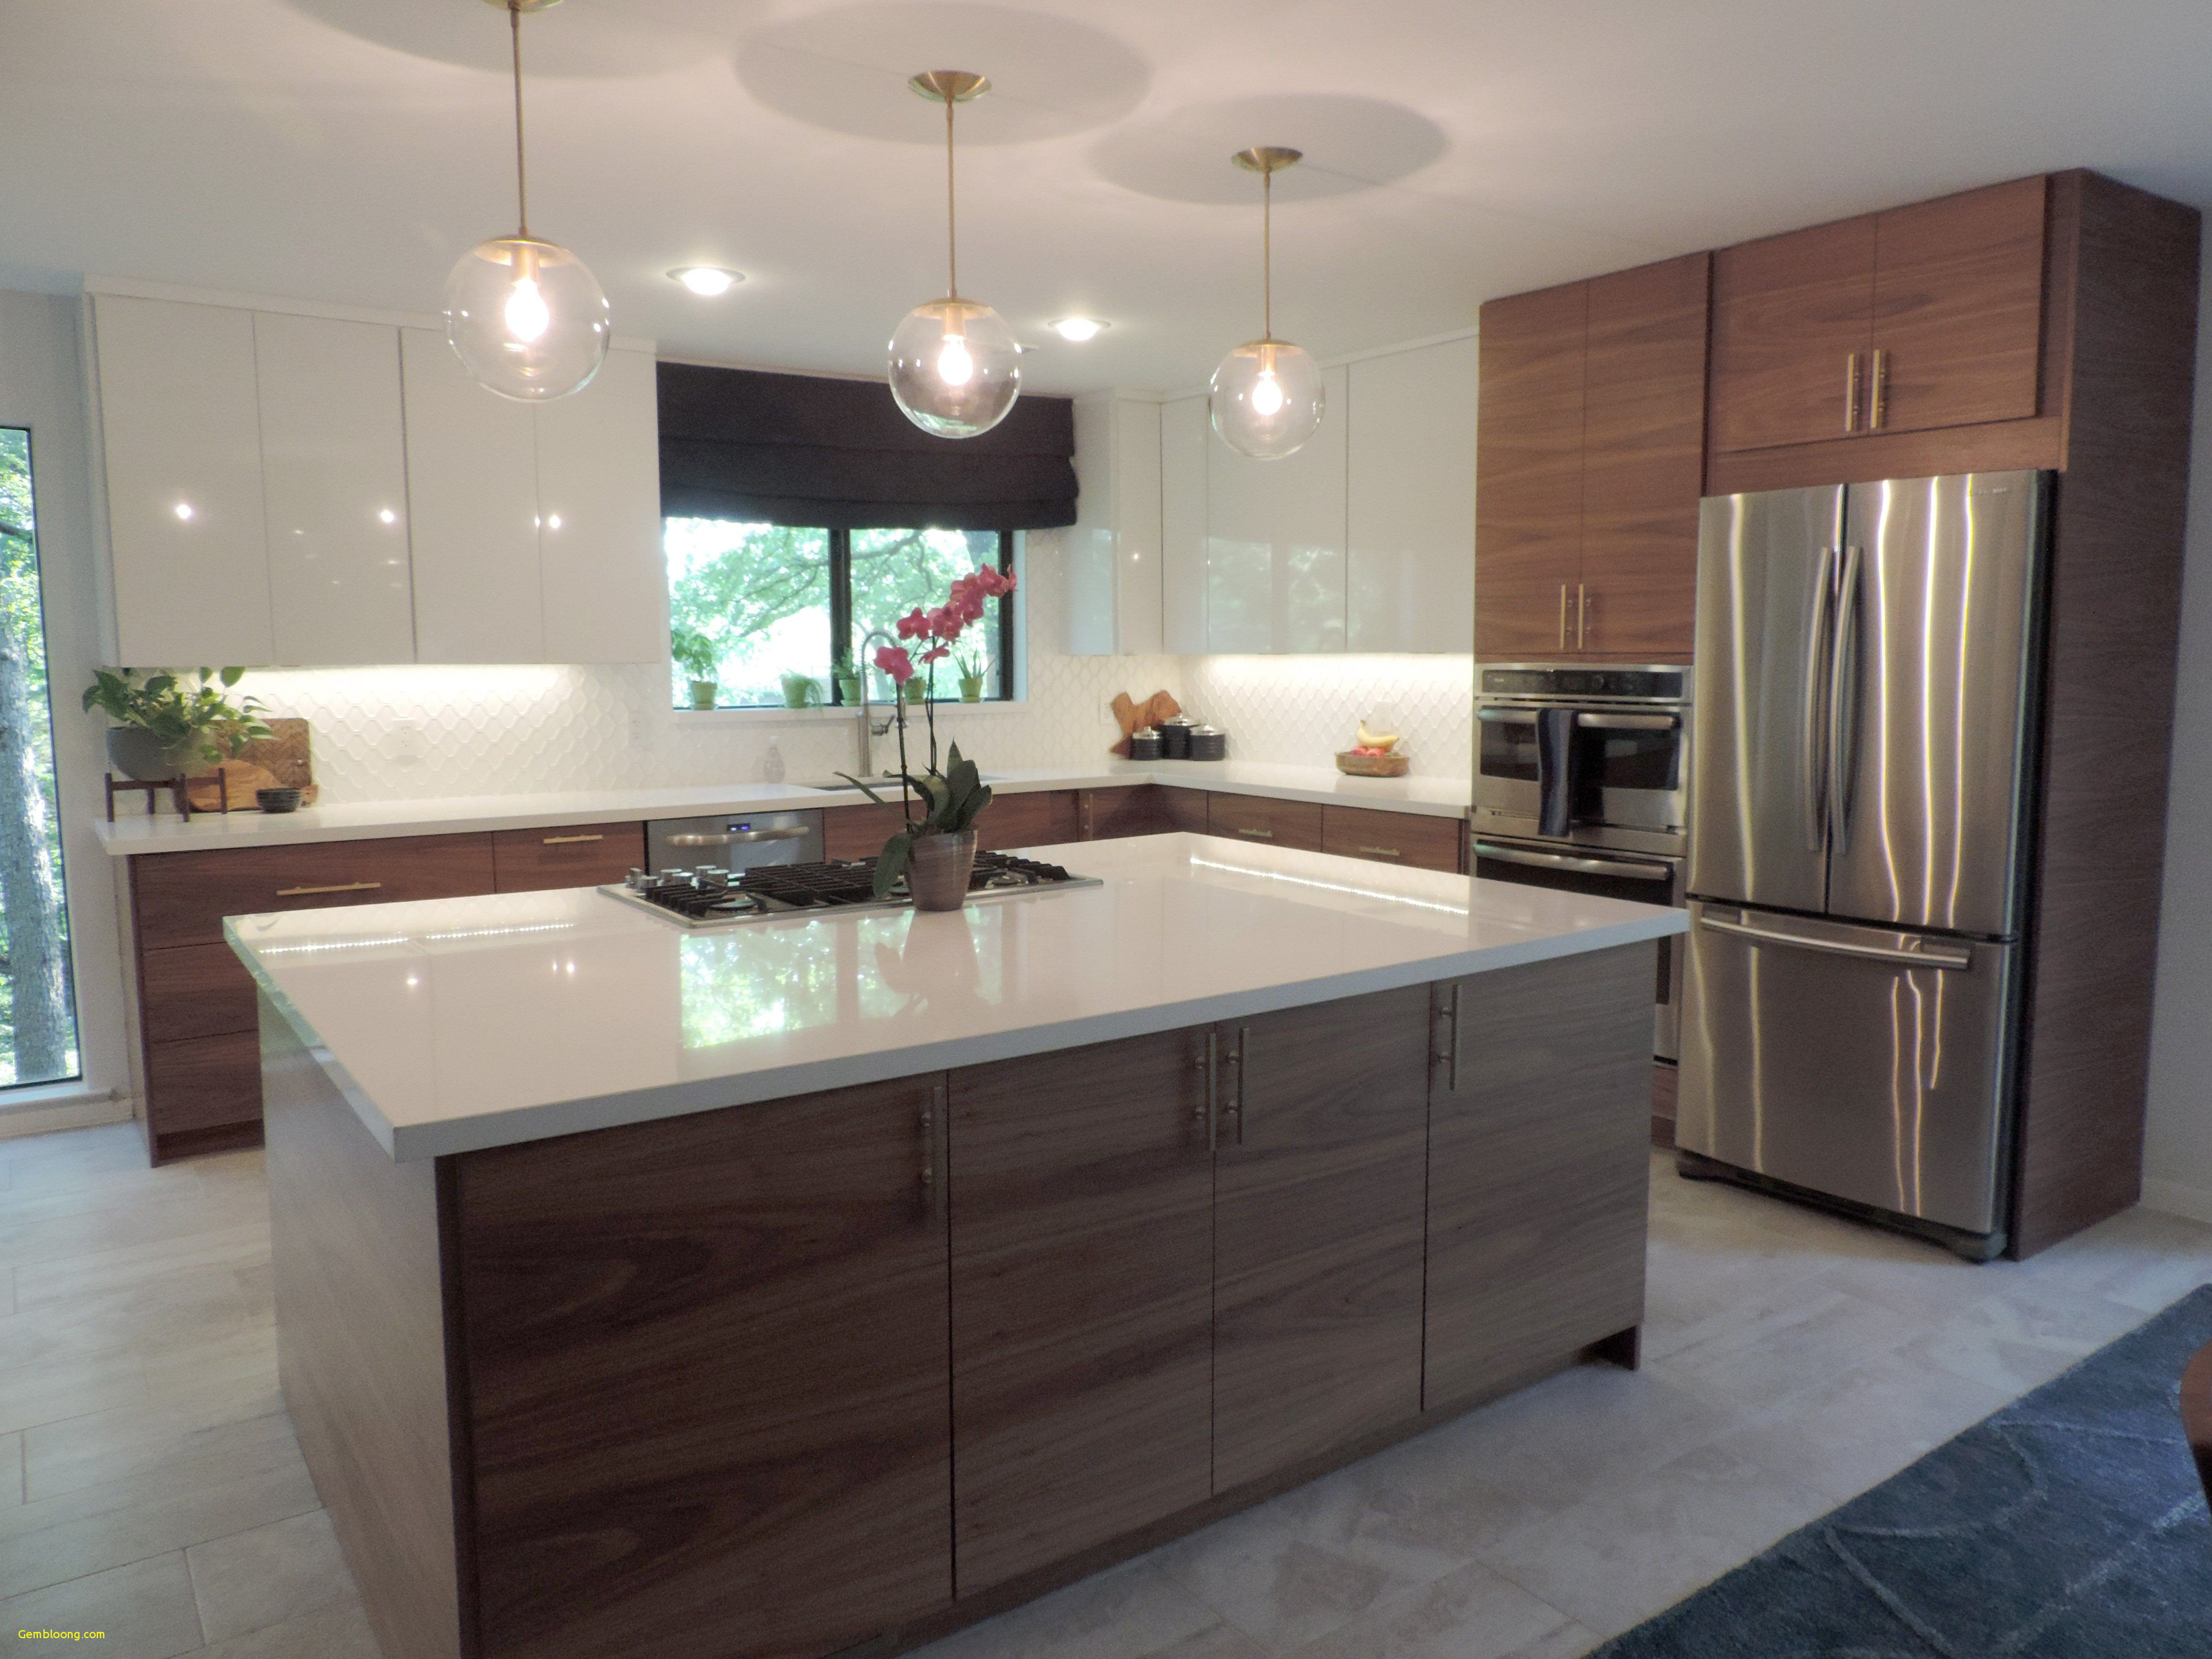 Used Kitchen Cabinets Awesome Luxury Used Kitchen Cabinets In New York